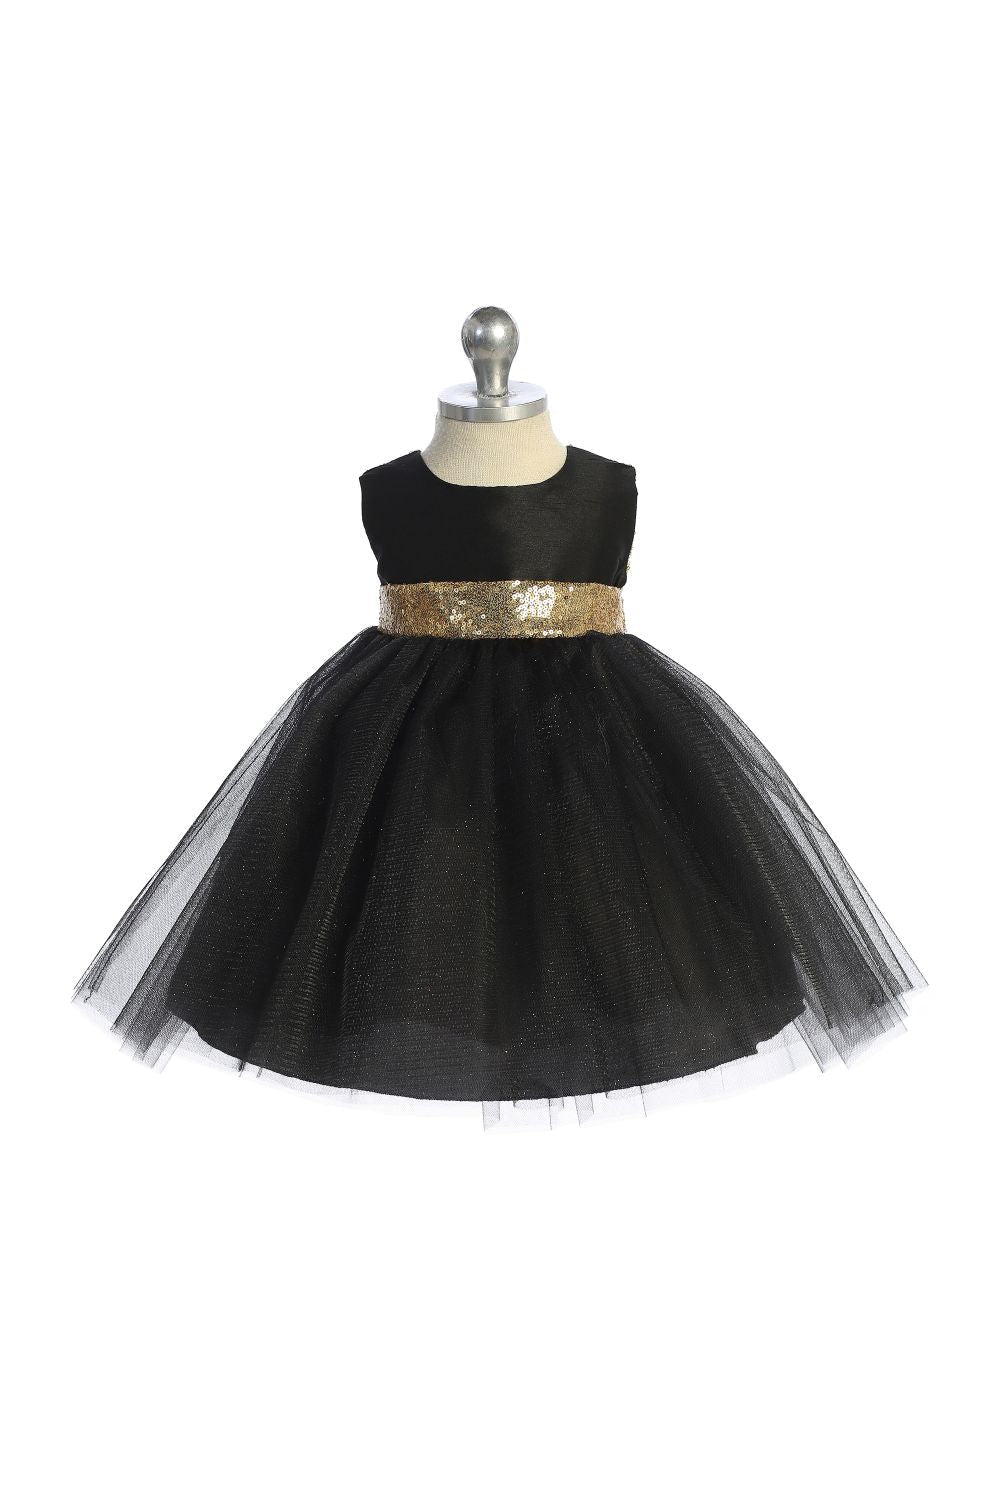 Baby Gold Silver Sequin V Back Girl Party Dress- AS498B Kids Dream